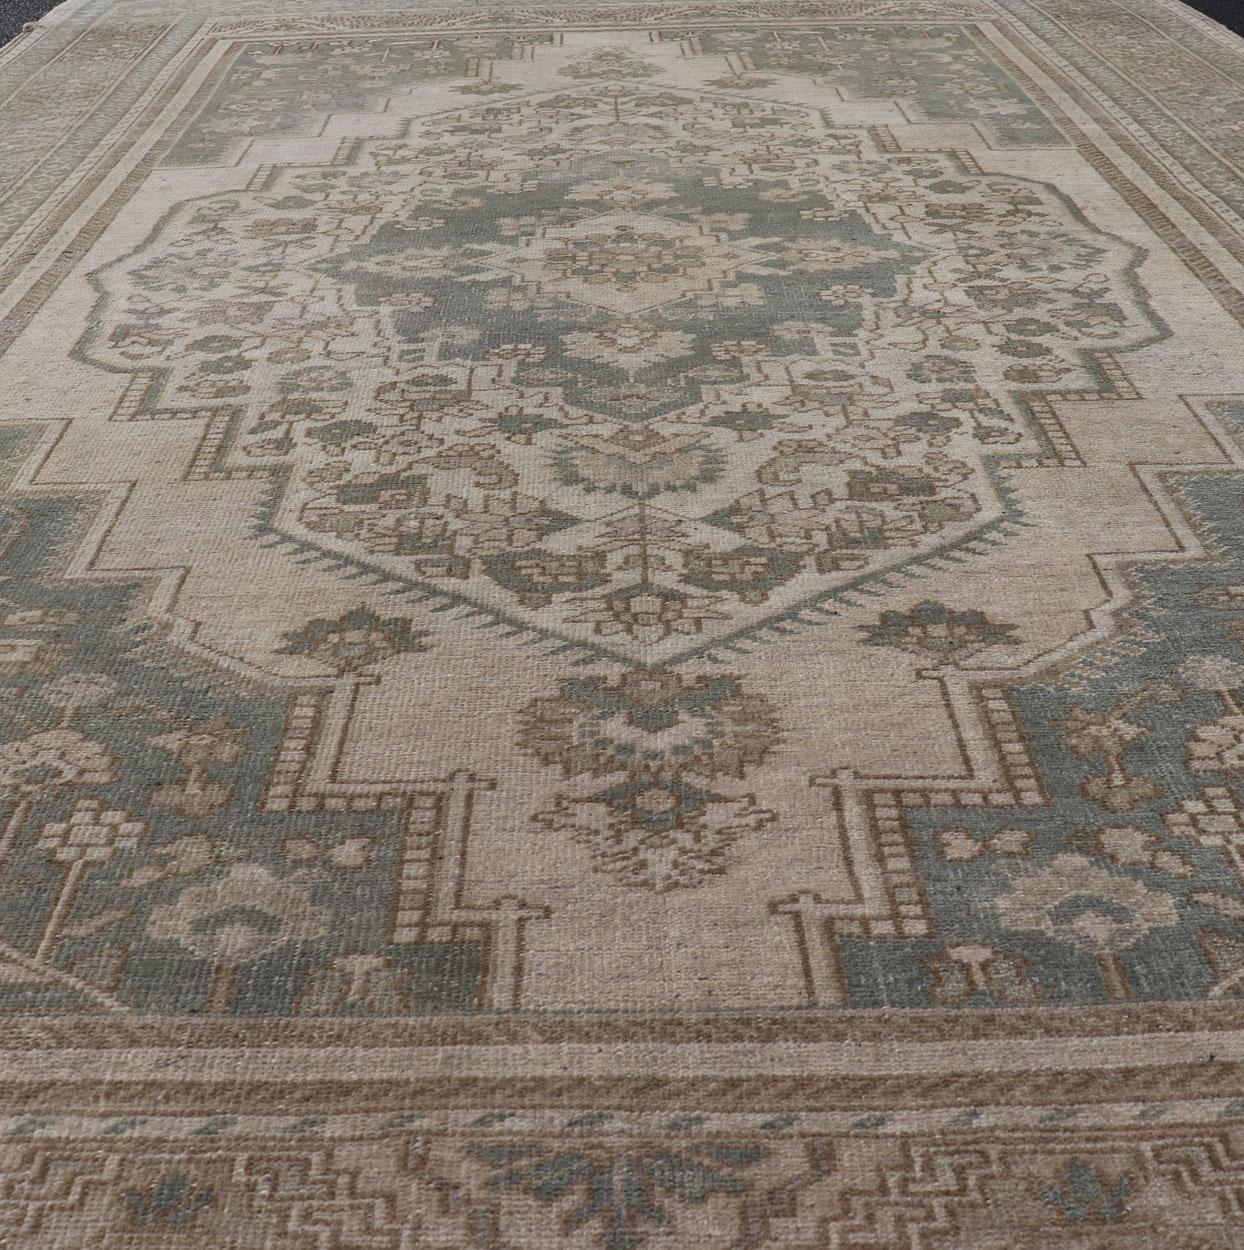 Turkish Oushak Vintage Medallion Rug in Light Blue-Green, Tan, Taupe, and Cream For Sale 6